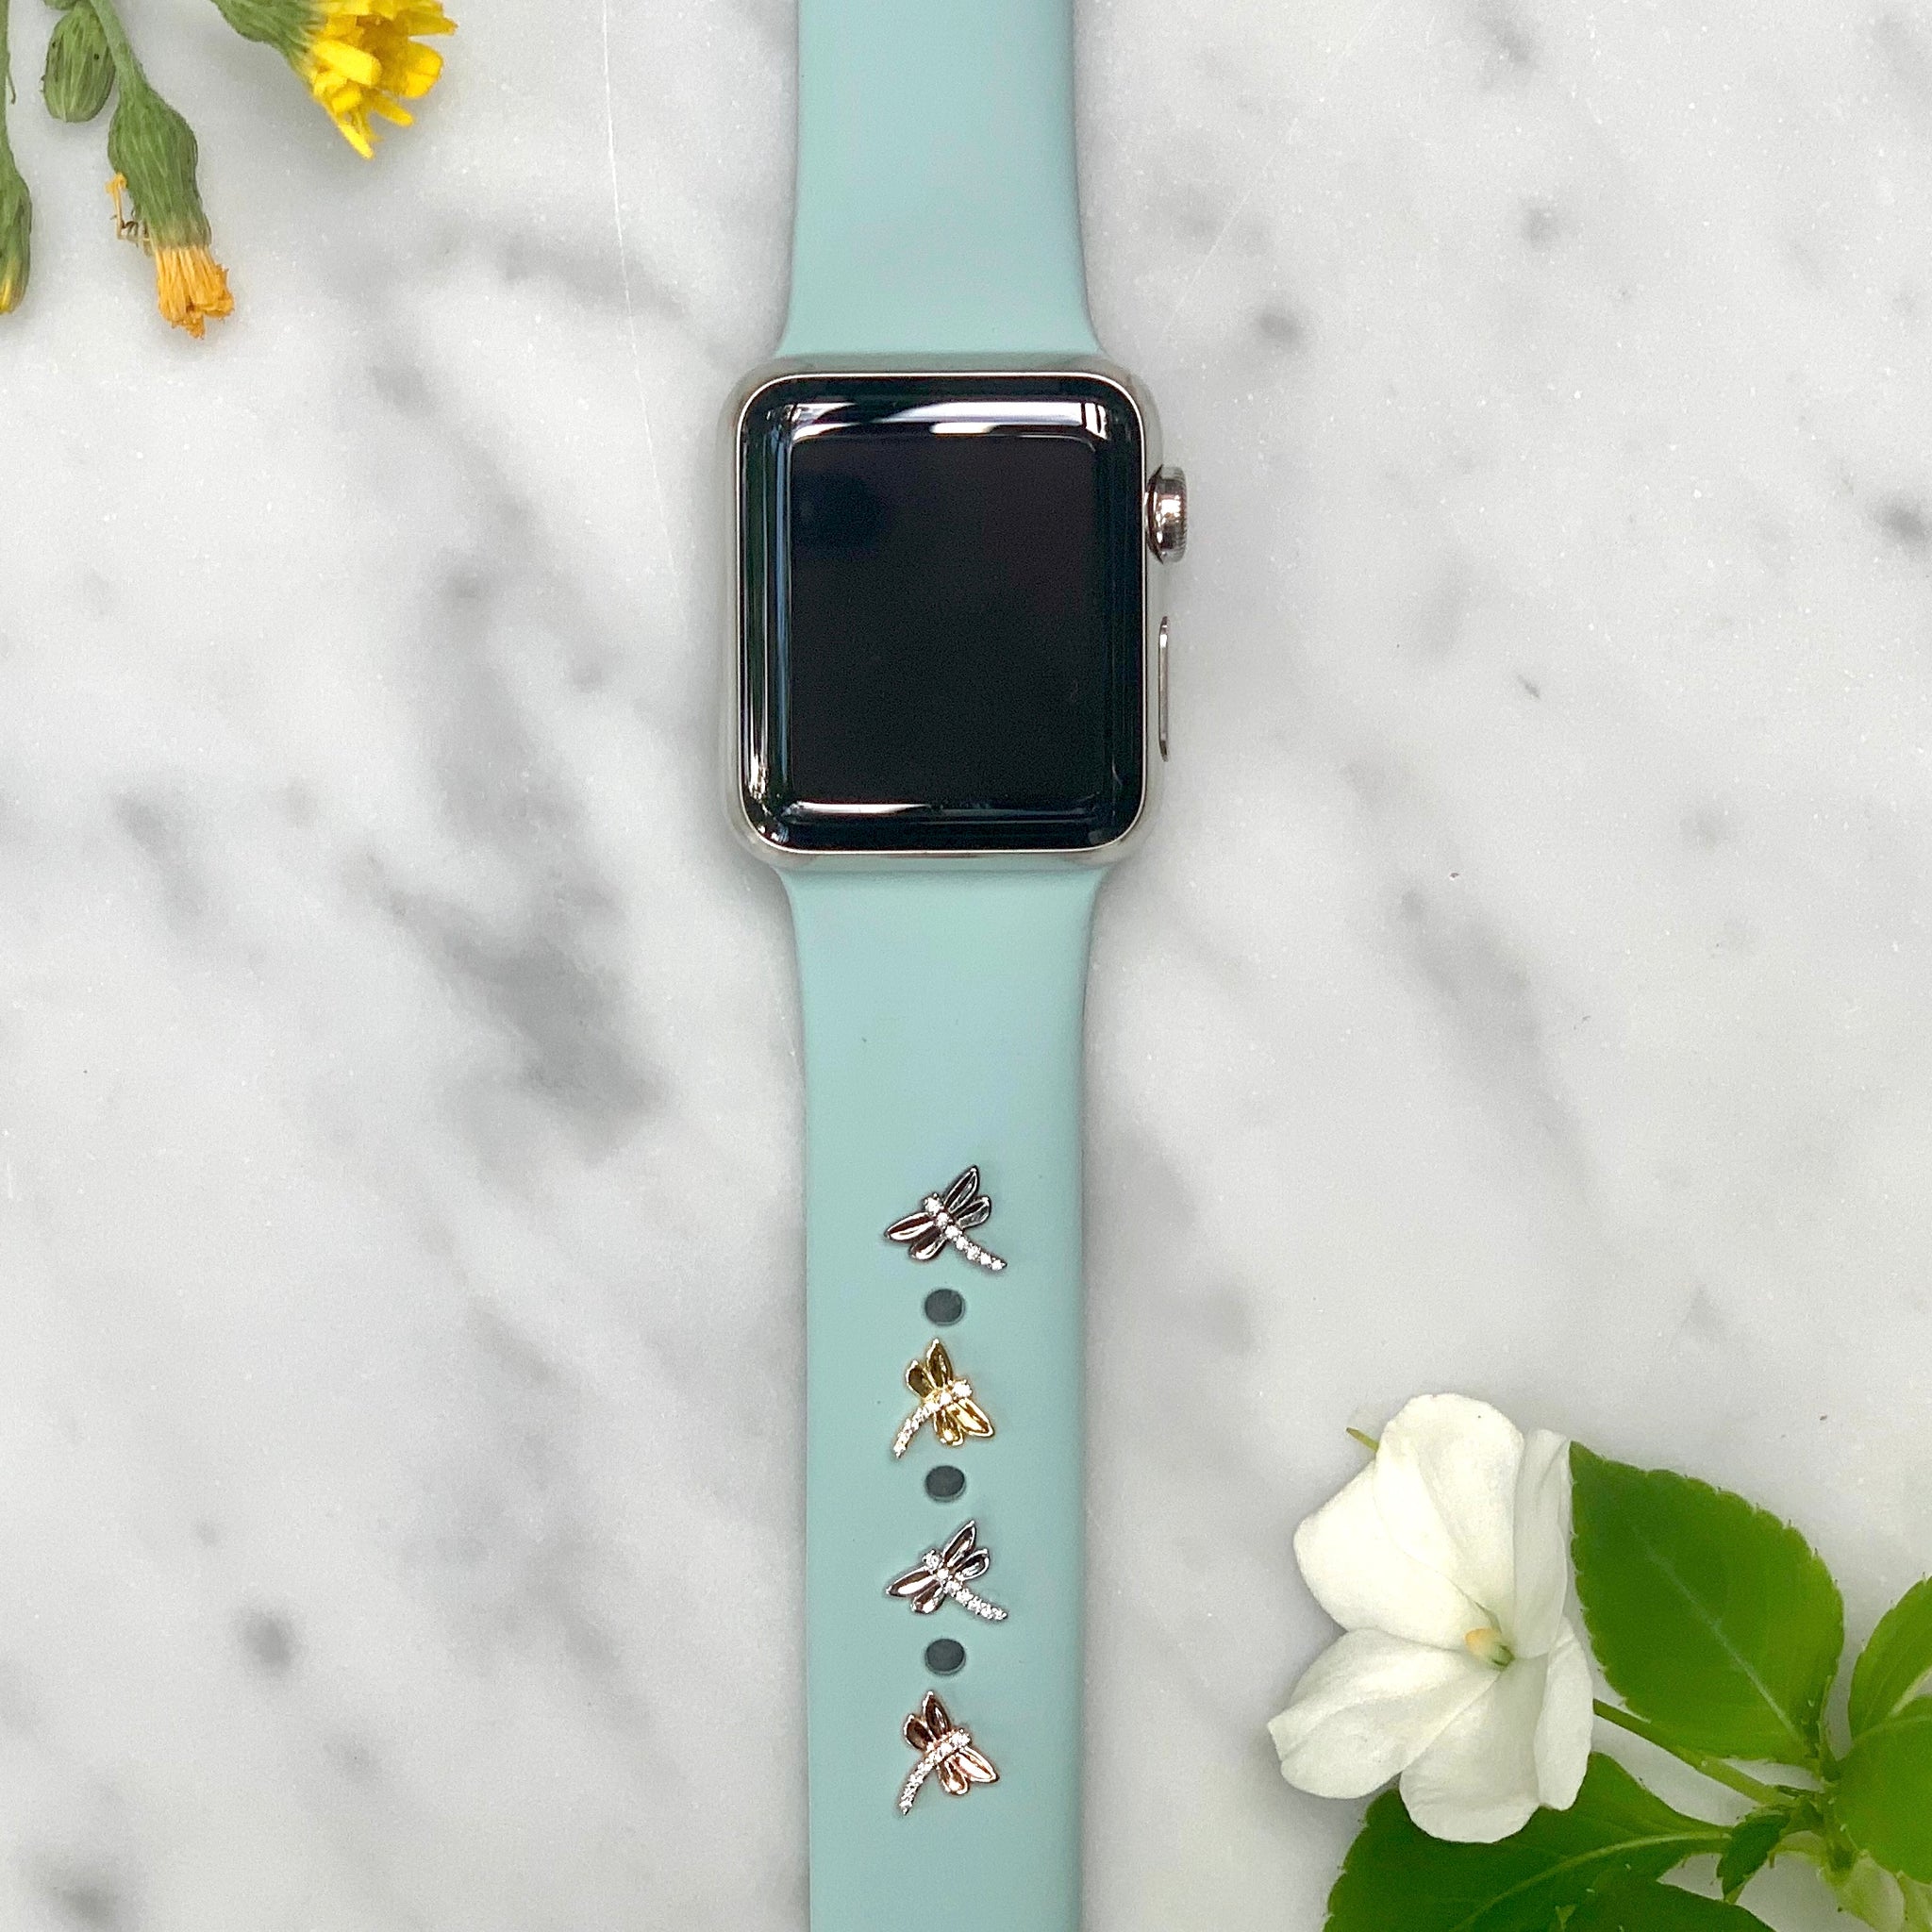 dragonfly Stud for Apple Watch Sport Bands | bytten